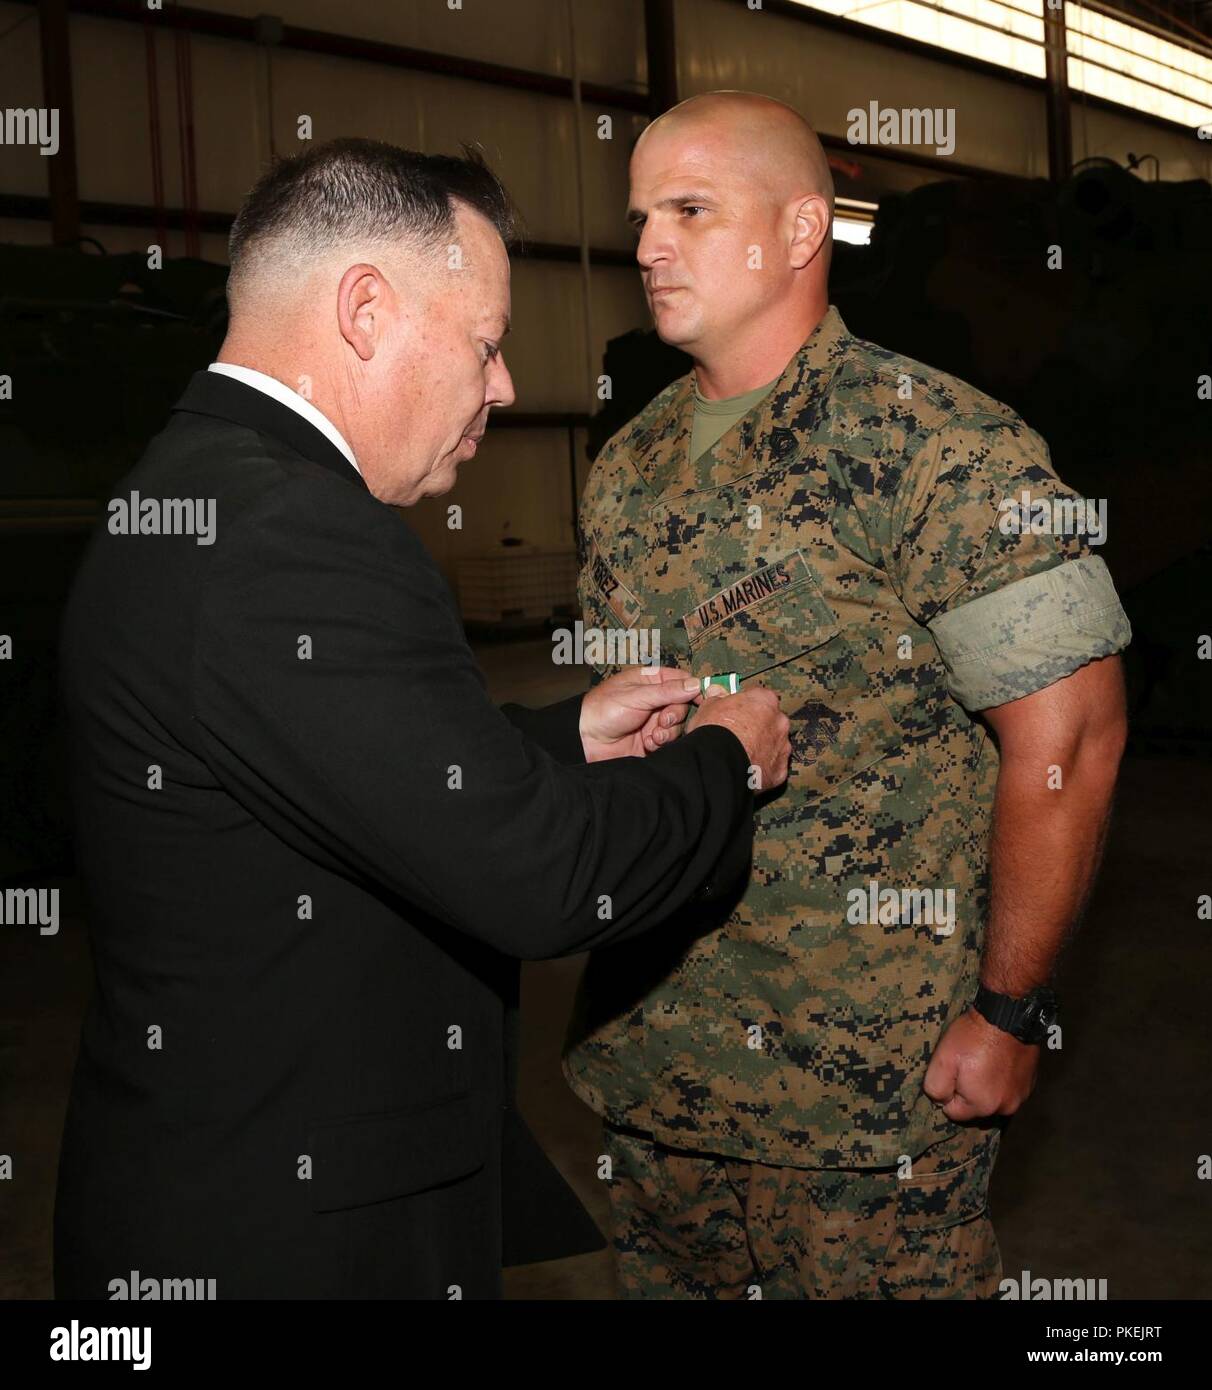 https://c8.alamy.com/comp/PKEJRT/gunnery-sgt-jeff-perez-tamn-lead-e-tamn-marine-force-storage-command-marine-corps-logistics-command-receives-a-navy-and-marine-corps-commendation-medal-from-retired-marine-lt-col-brian-spooner-retiring-official-during-a-retirement-ceremony-held-aboard-marine-corps-logistics-base-albany-aug-1-PKEJRT.jpg